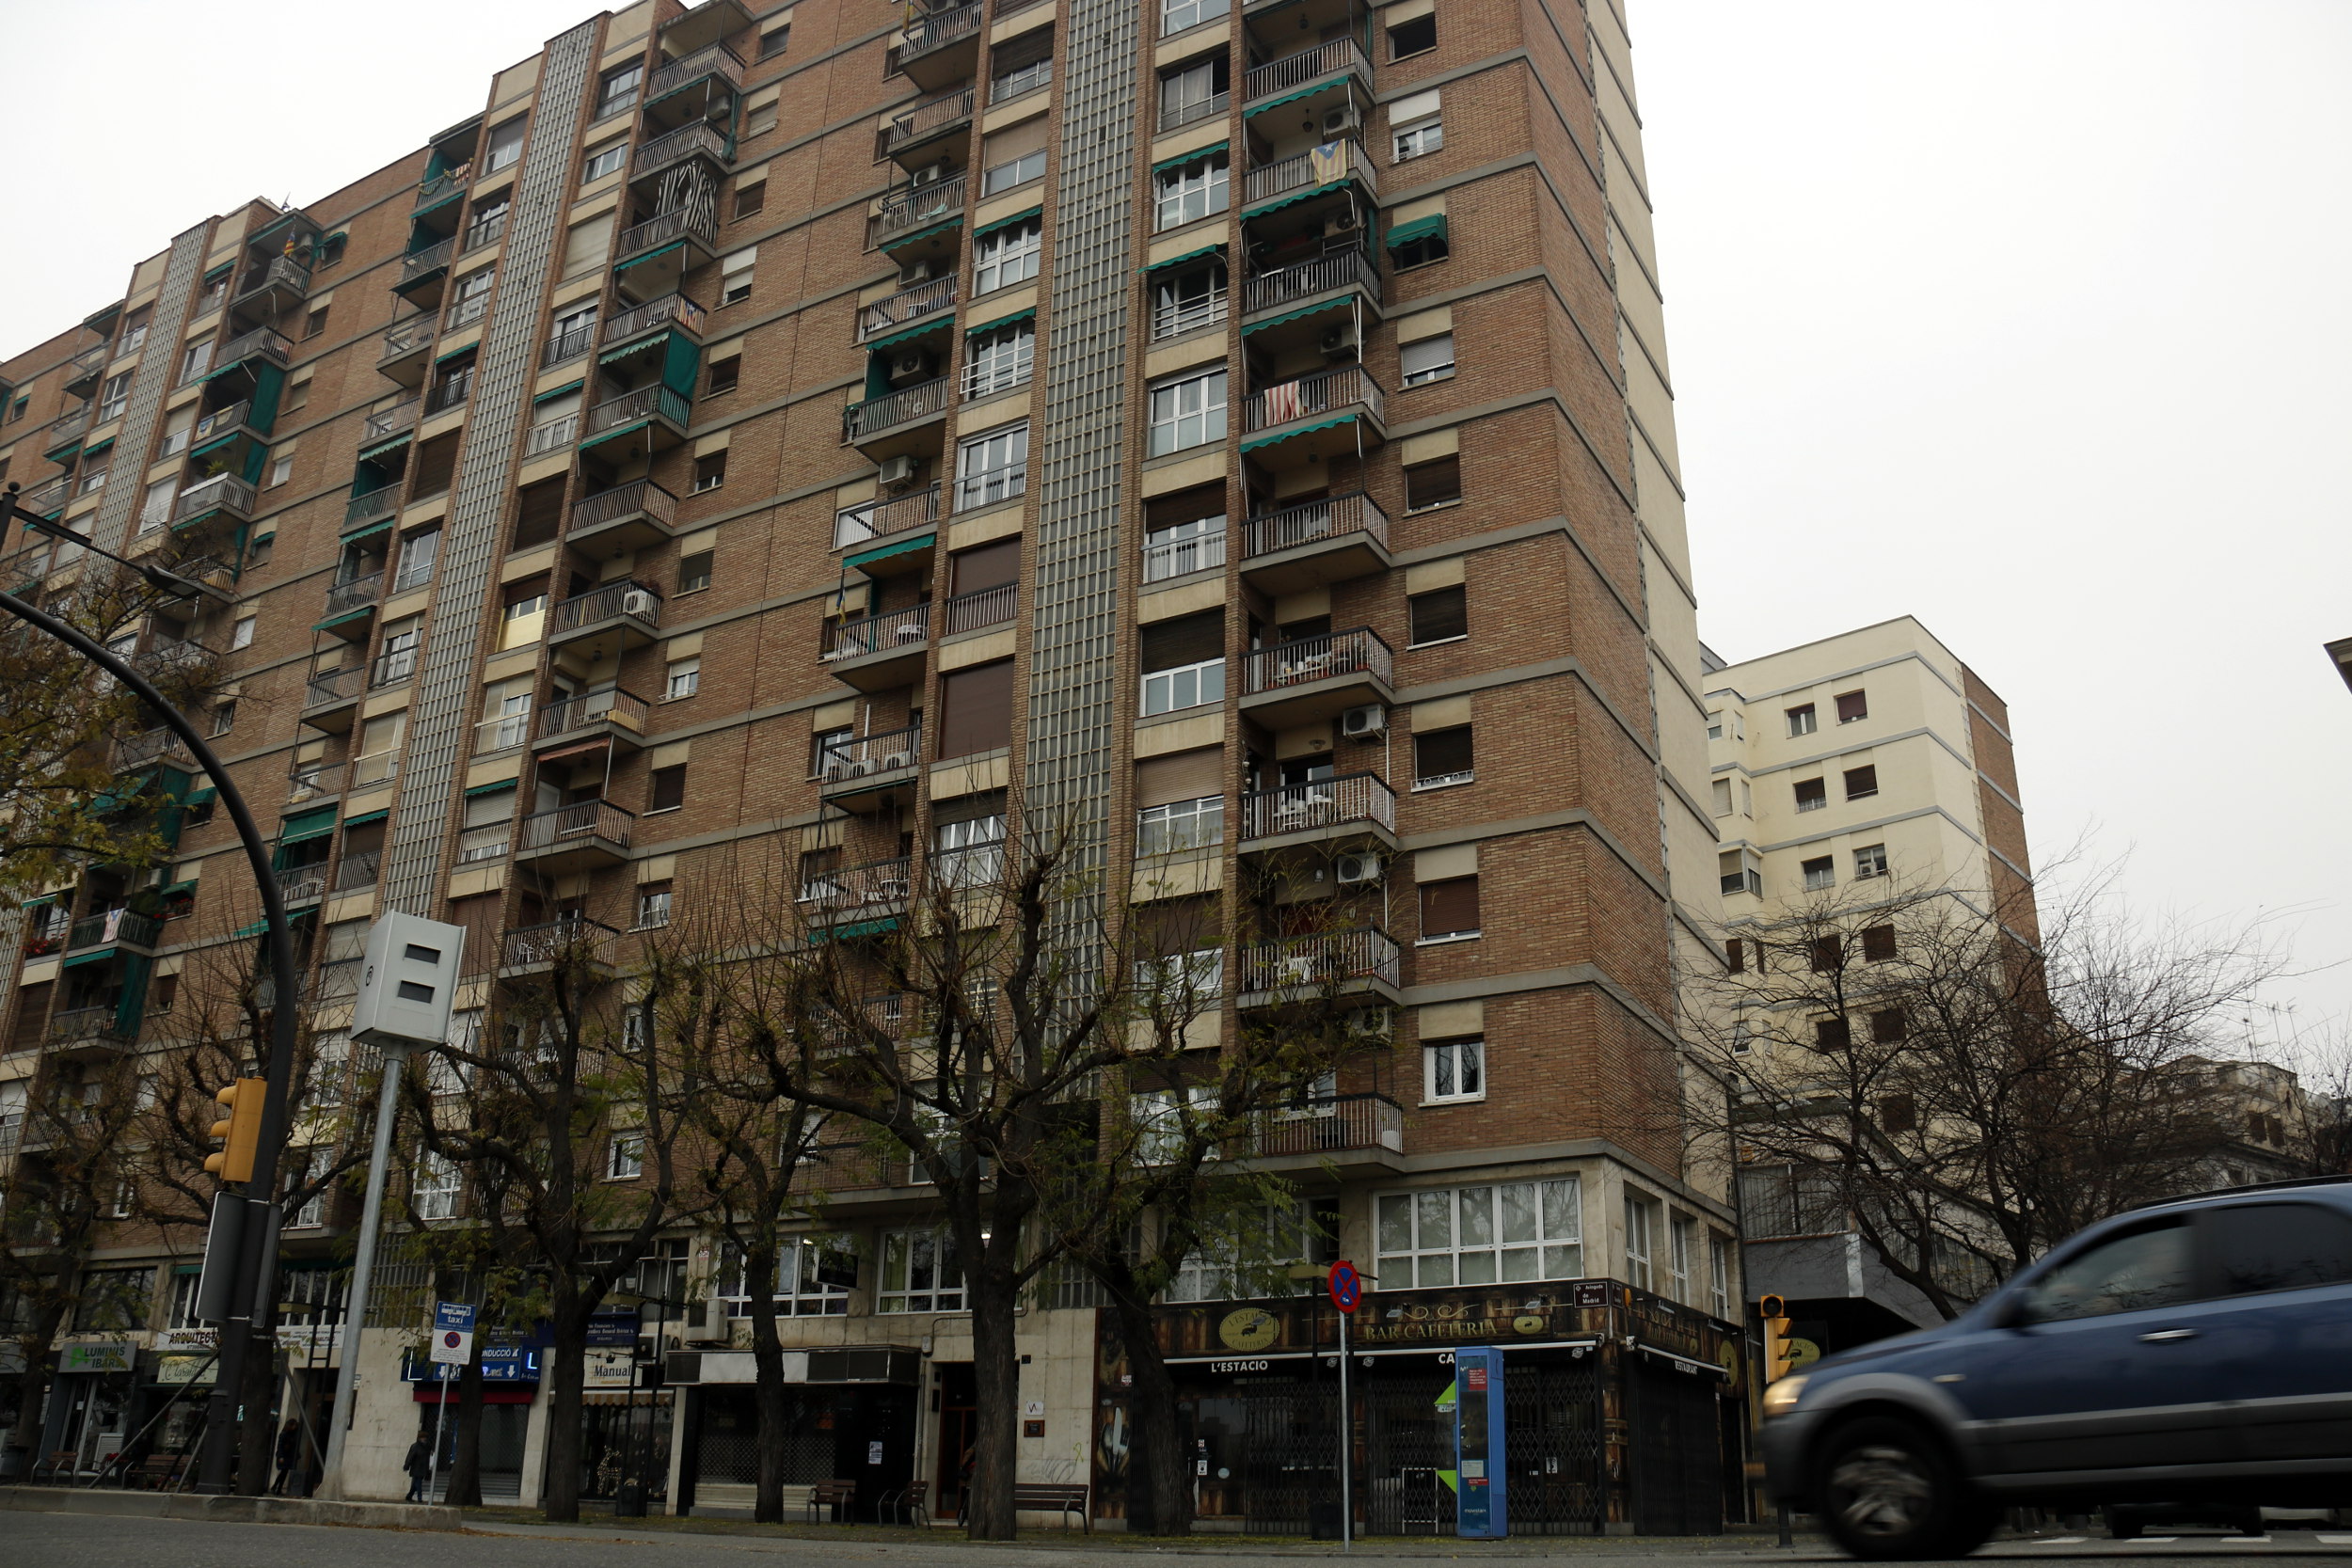 Appartment block in Barcelona's Meridiana Avenue (by ACN)